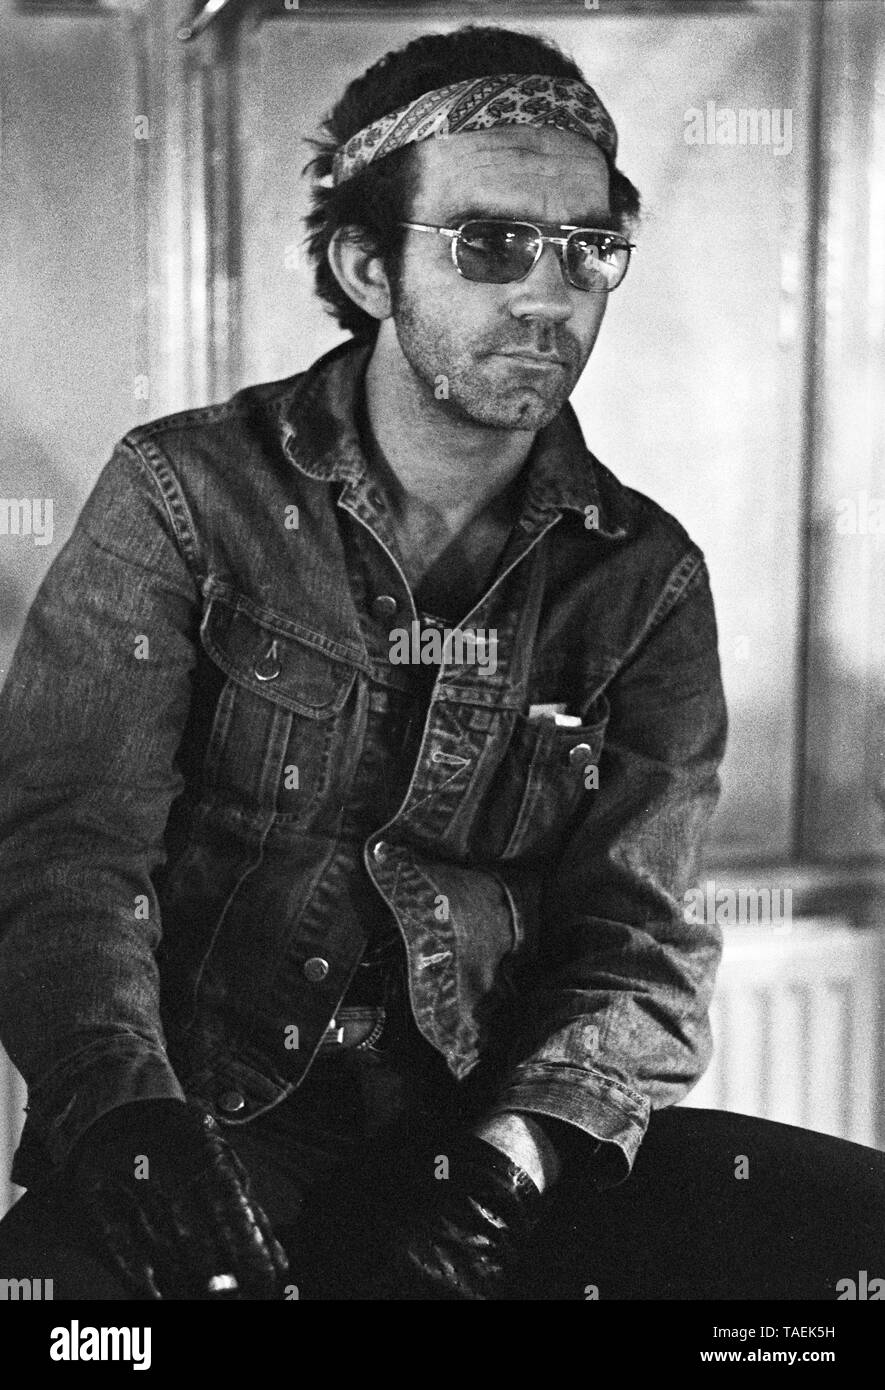 Amsterdam, HOLLAND: JJ Cale during interview, Carre Theatre, Amsterdam in 1974 (Photo by Gijsbert Hanekroot) *** Local Caption *** J.J. Cale Stock Photo